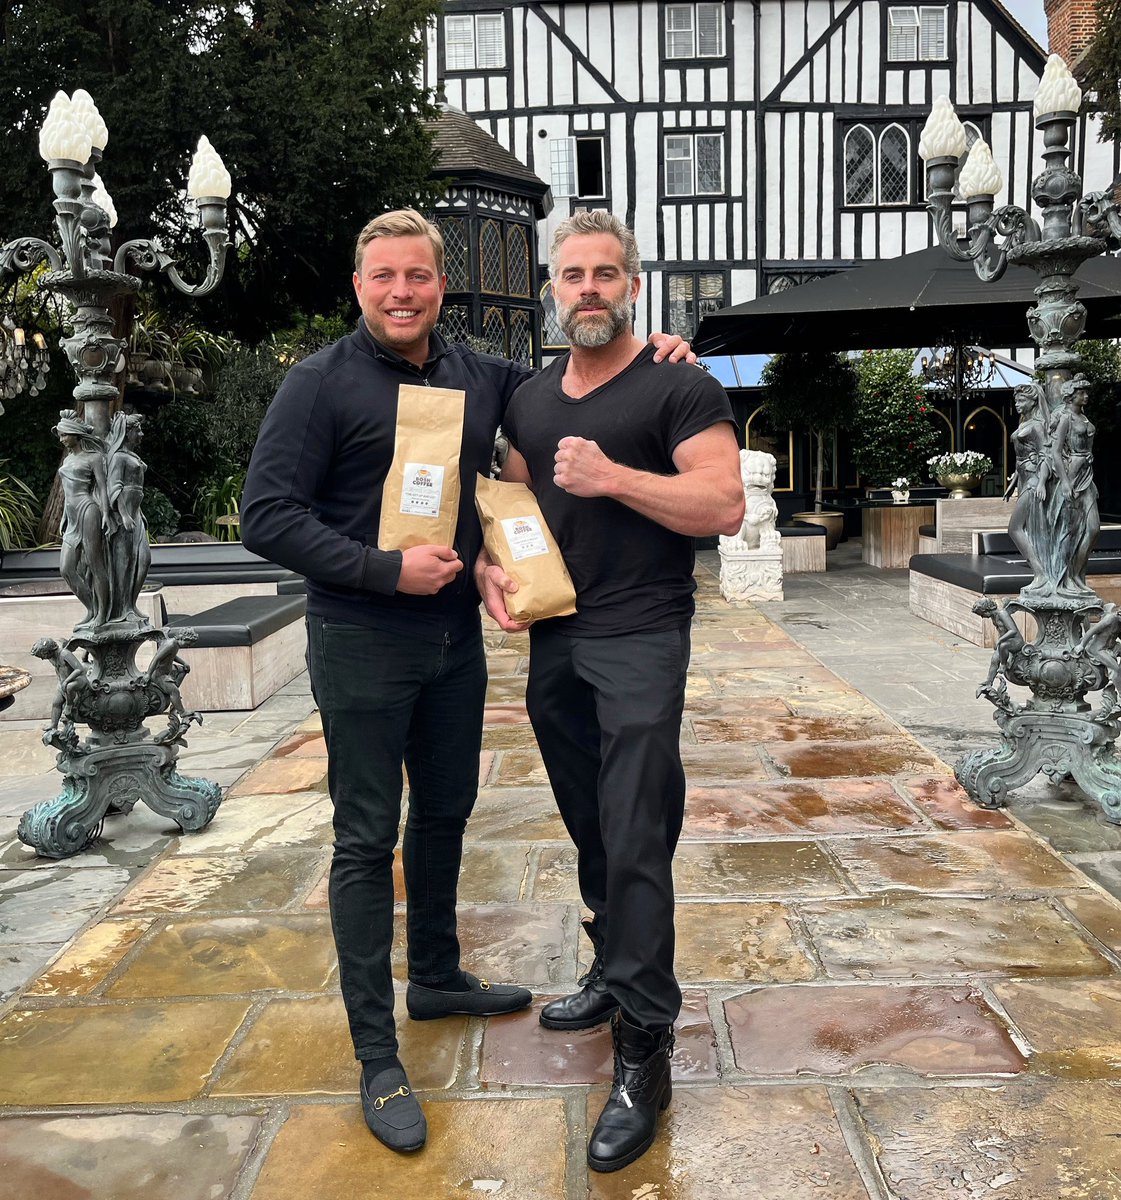 My pal Dylan down at @SheeshChigwell said he’s gotta try some Bosh Coffee! This is my favourite restaurant, if your in ESSEX get yourself down there!! The food is different class! #BOSH #BoshCoffee #Sheesh available to order now bosh-coffee.co.uk